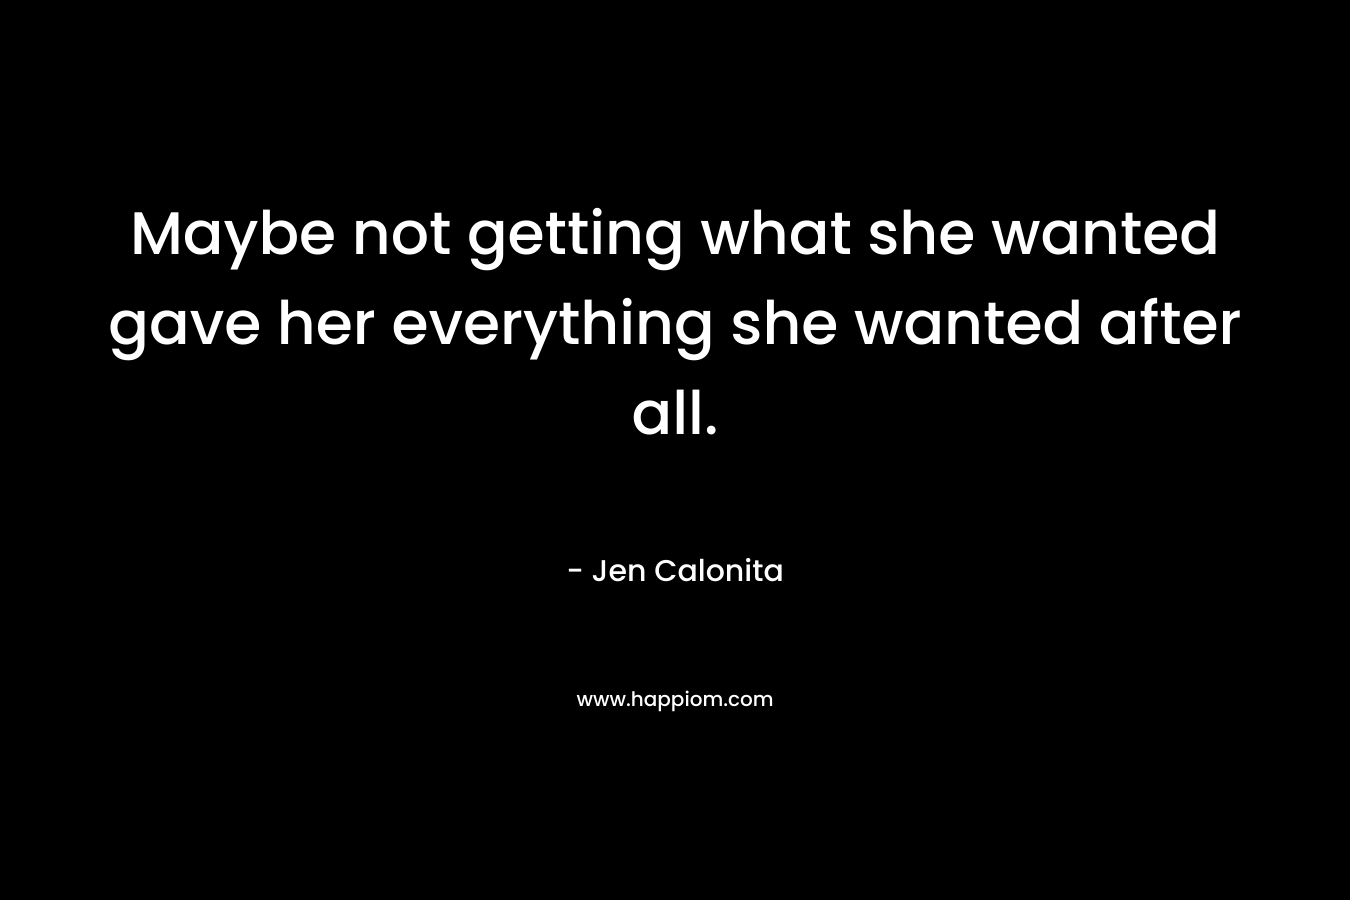 Maybe not getting what she wanted gave her everything she wanted after all.